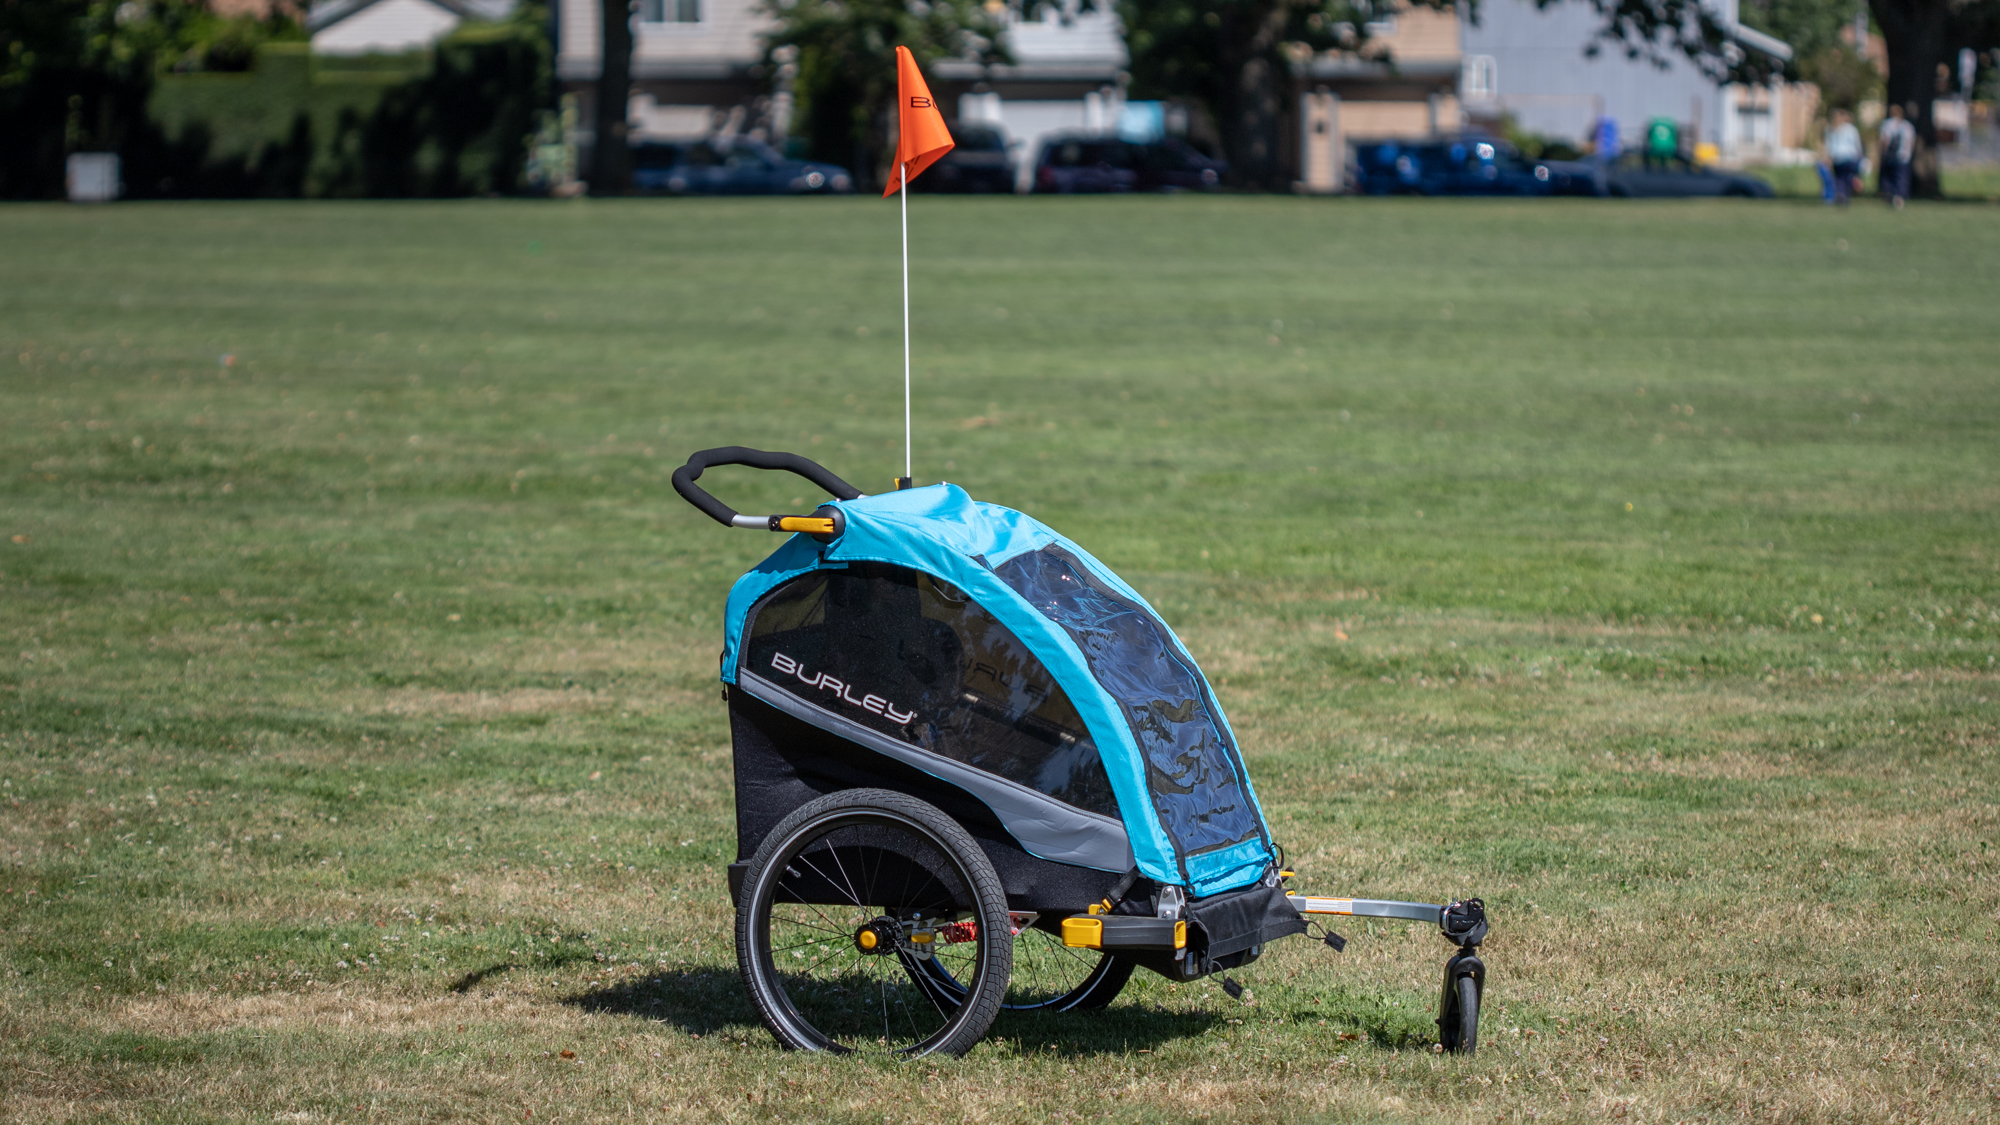 The Burley D’Lite X bike trailer does one thing really well